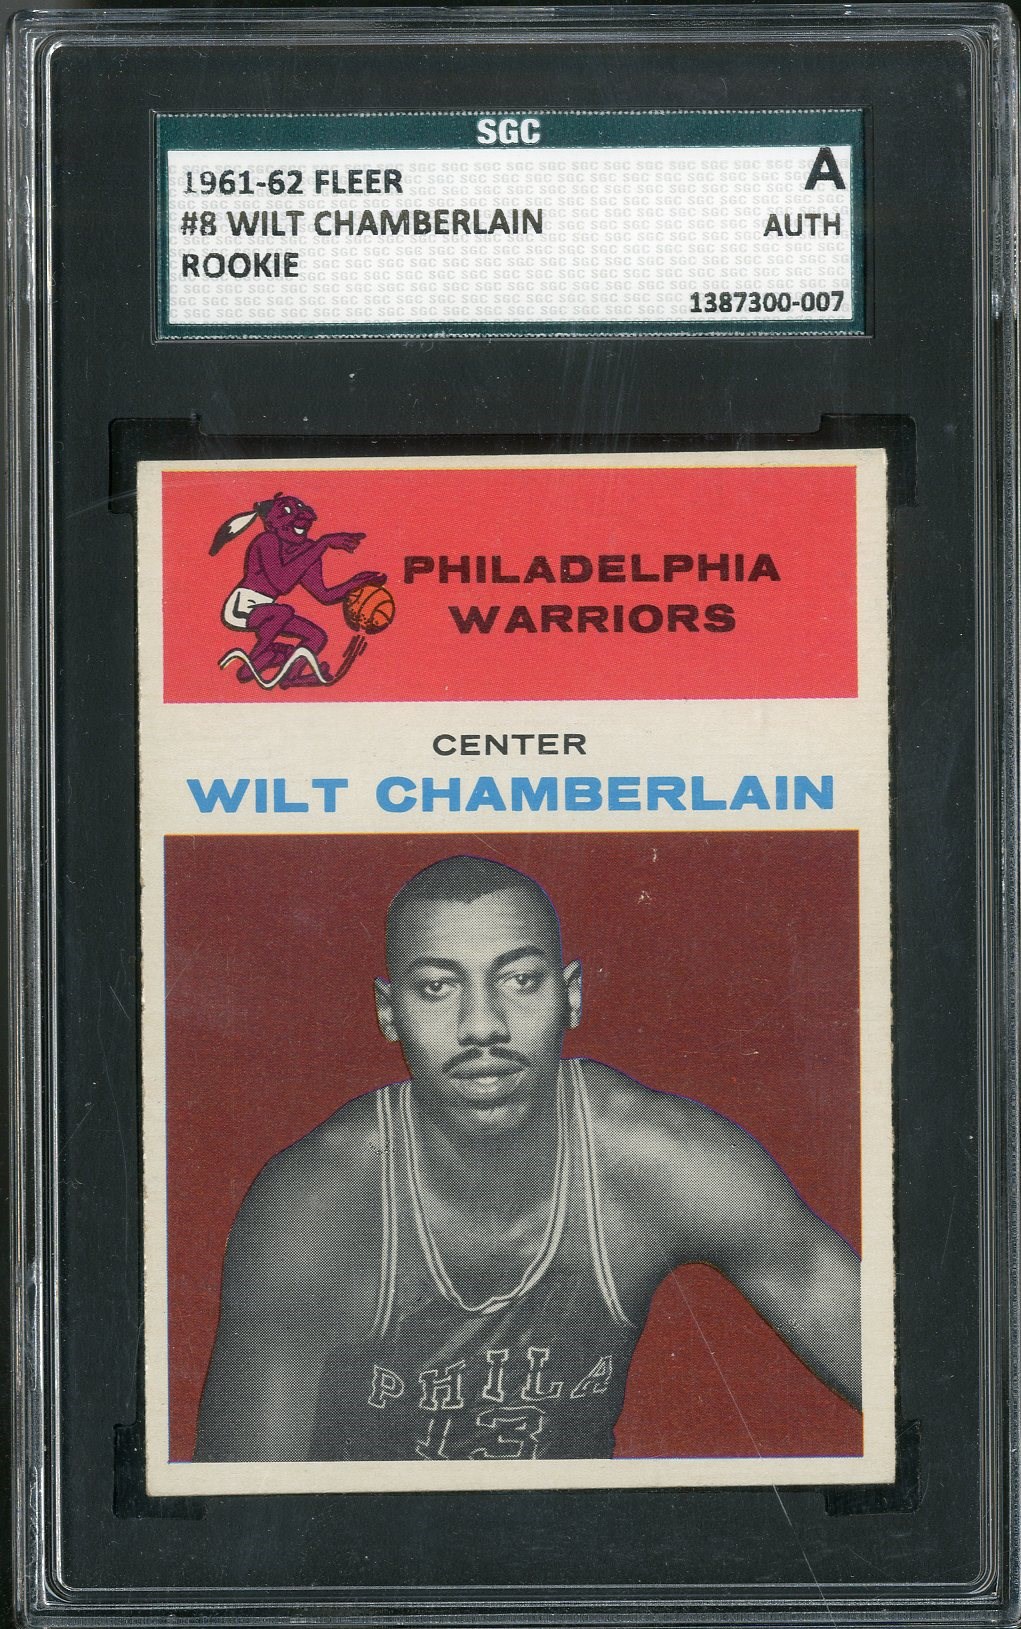 Baseball and Trading Cards - 1961 Fleer Wilt Chamberlain #8 Rookie Card (SGC Authentic)